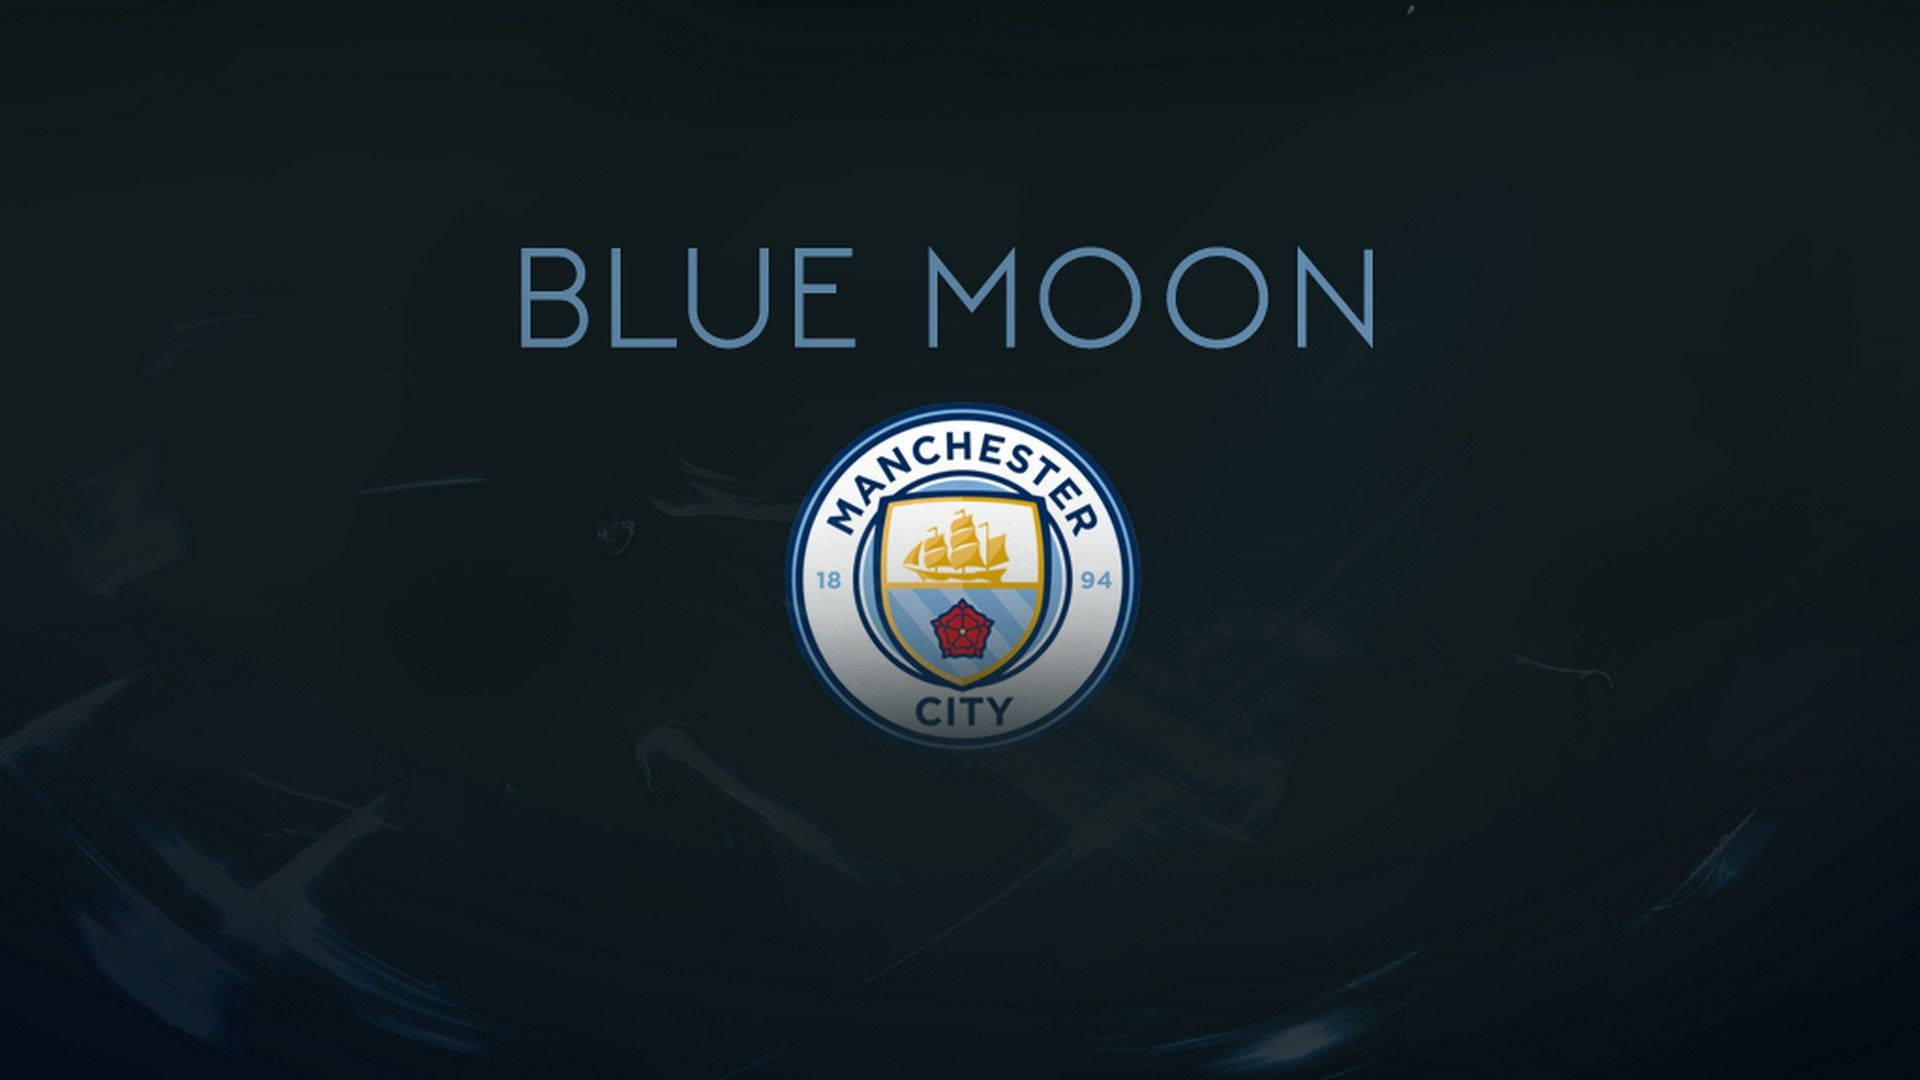 The Official Logo Of Manchester City Football Club Background